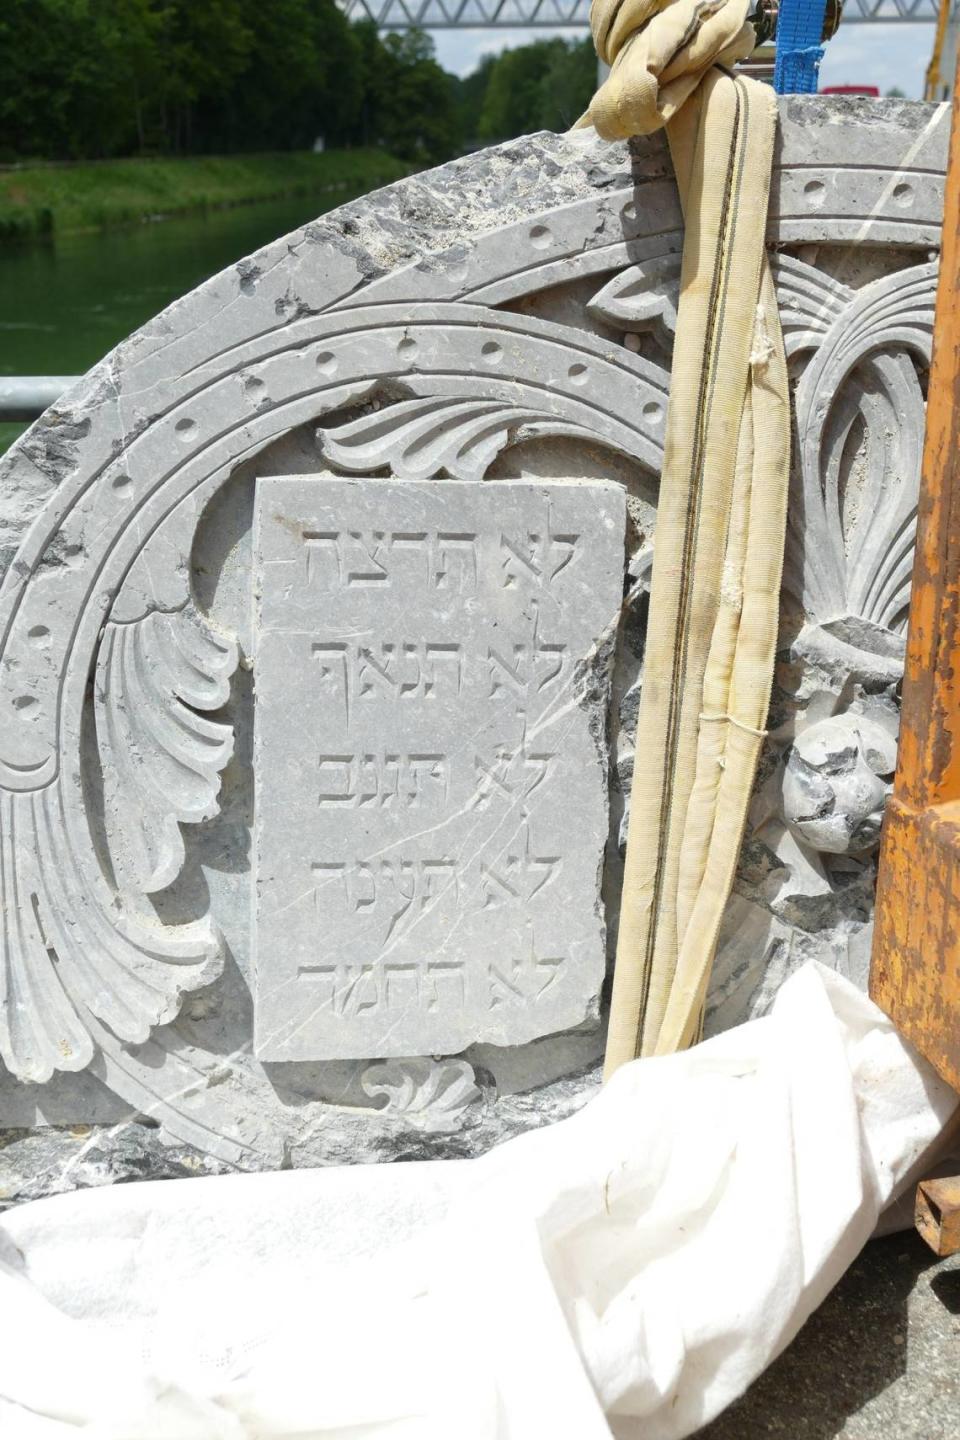 A stone from the synagogue’s Torah shrine showing the Ten Commandments.